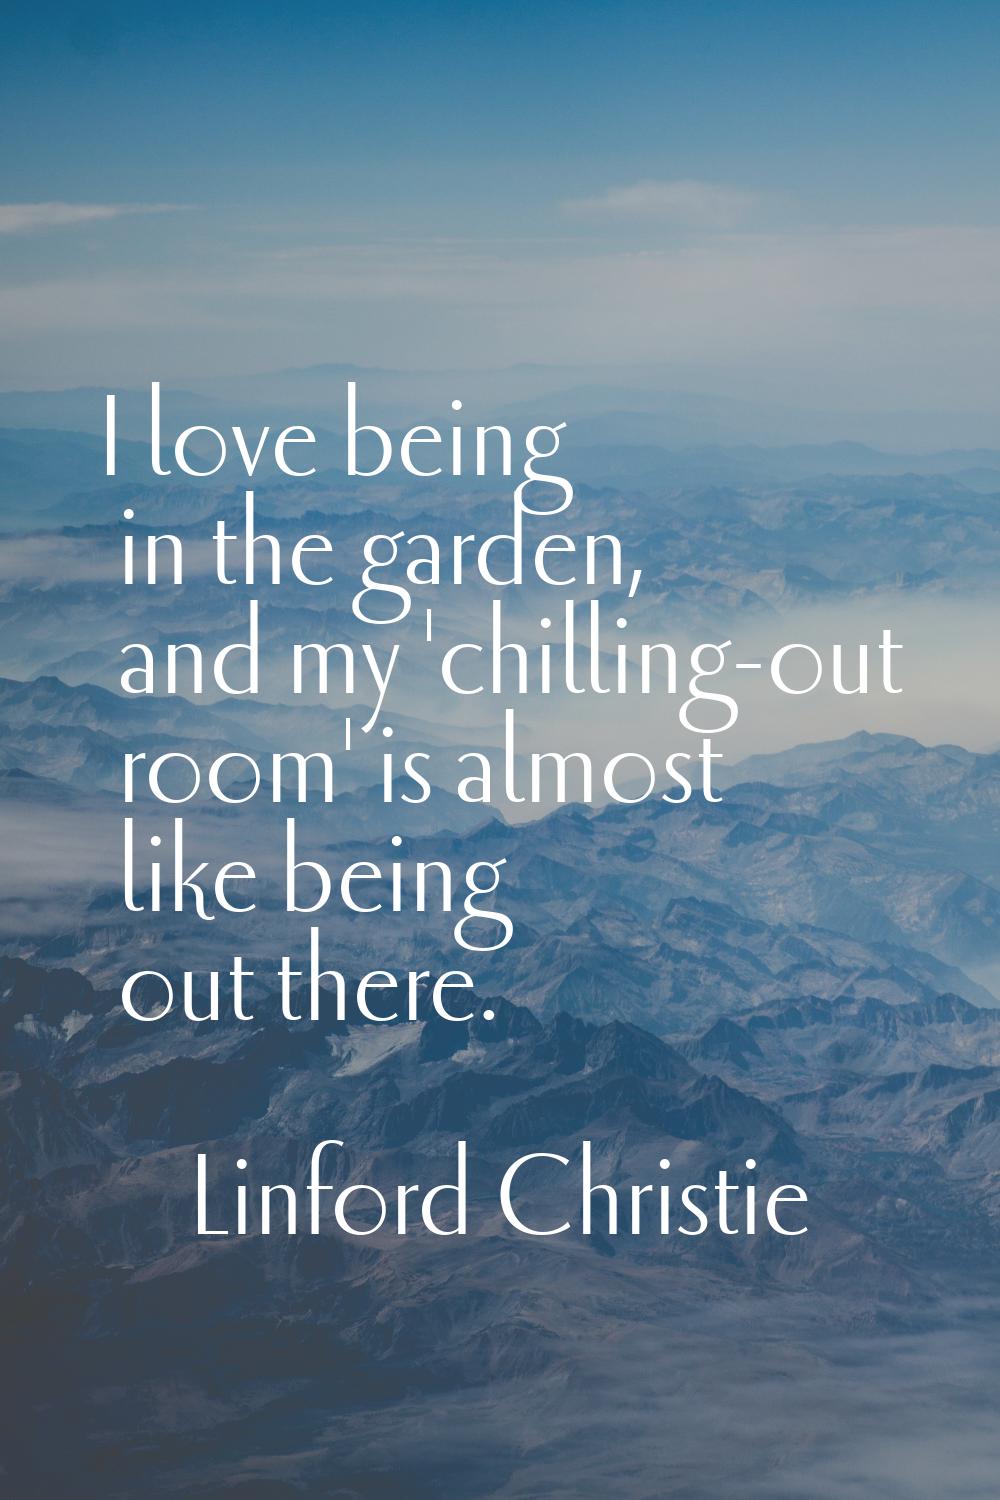 I love being in the garden, and my 'chilling-out room' is almost like being out there.